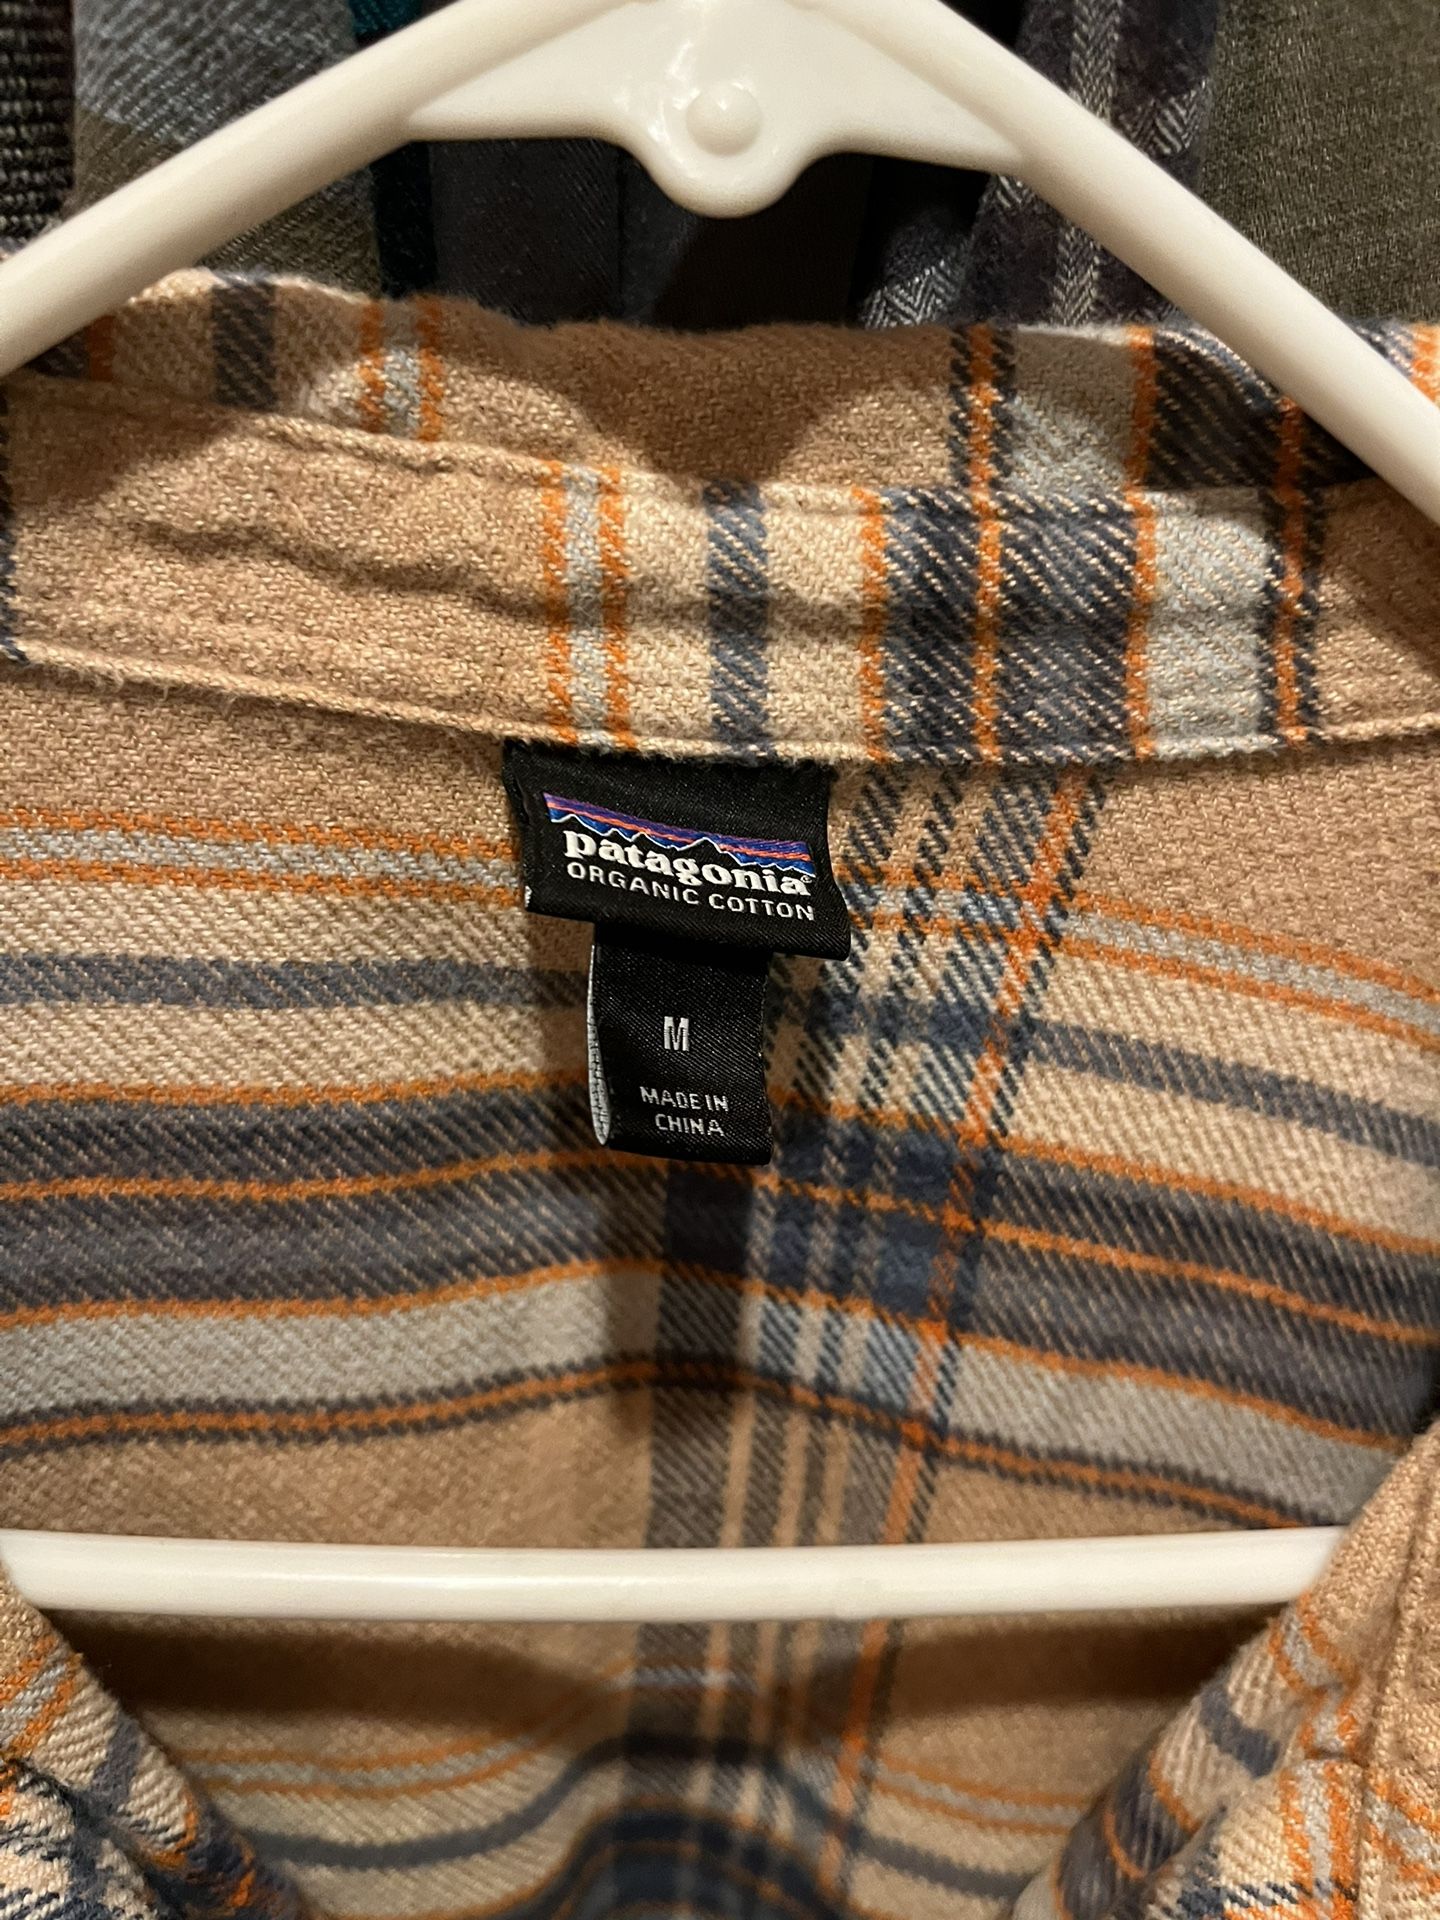 Womens Patagonia Flannel